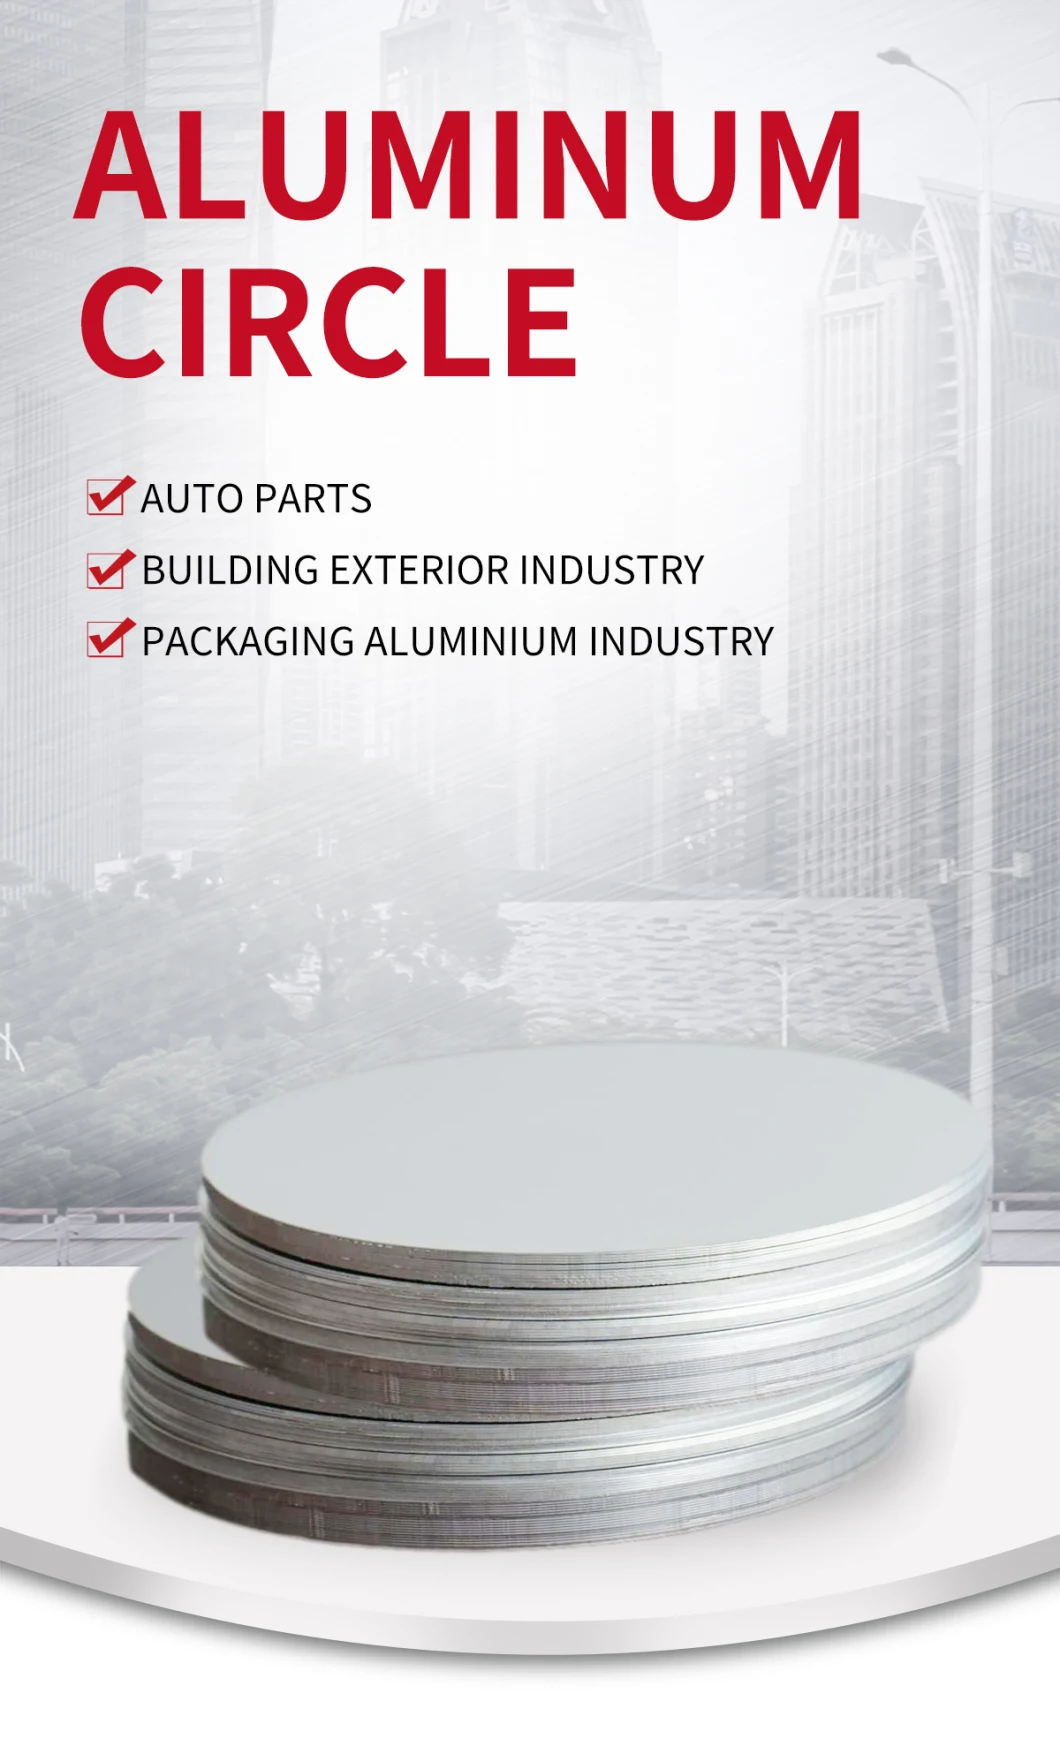 Cost-Effective Aluminum Circles From China Are Available for Customization